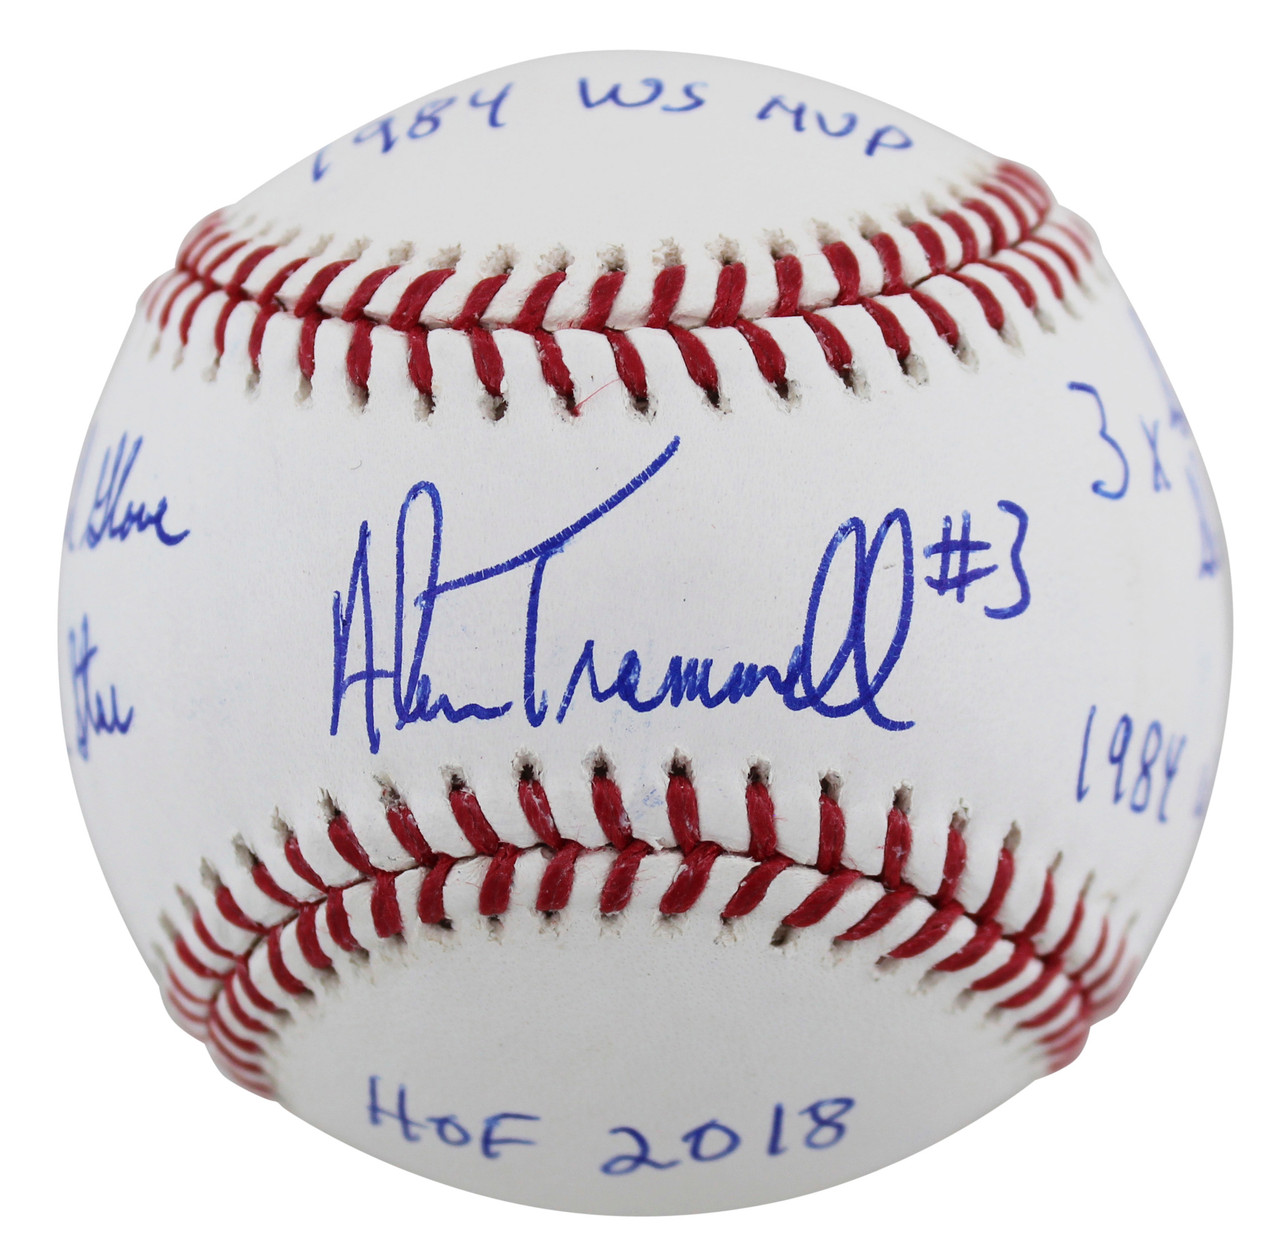 Tigers Alan Trammell Career Stat Authentic Signed Oml Baseball